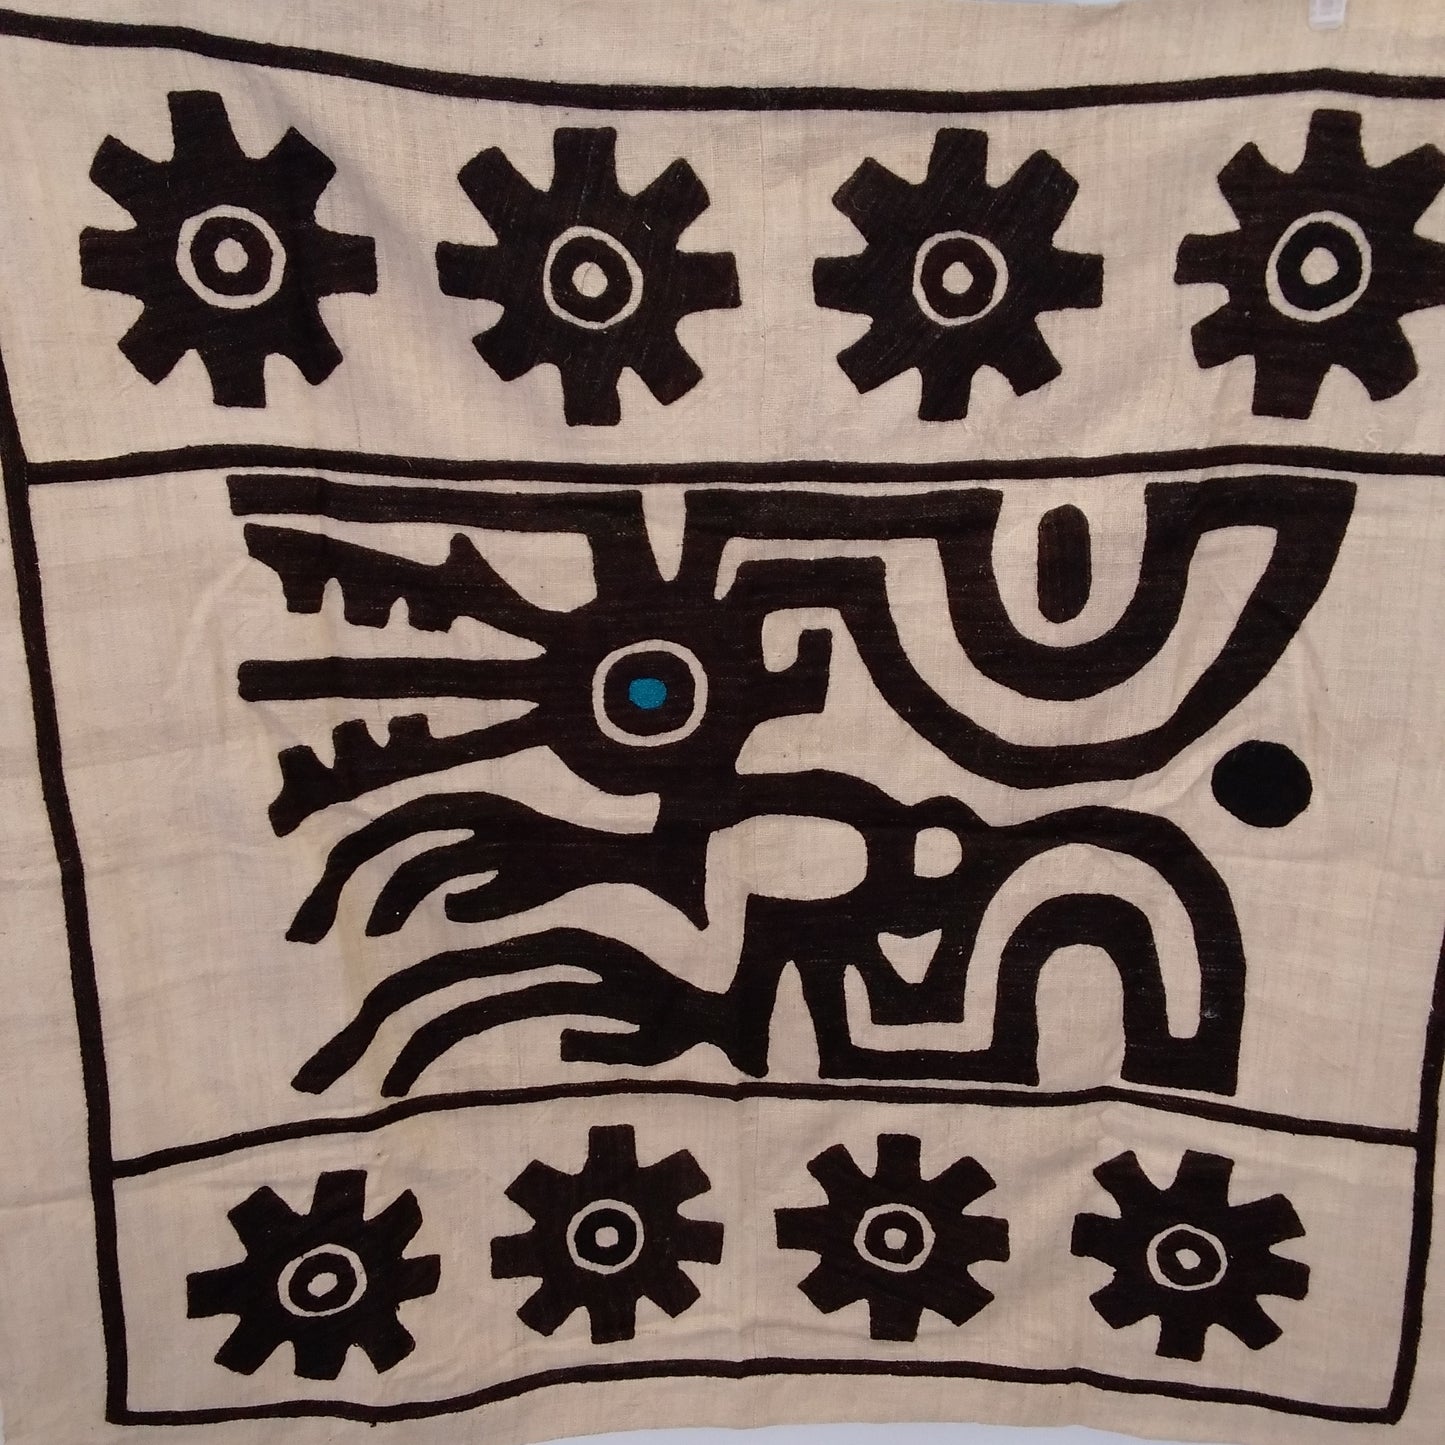 Tan and Brown Embroirdered Aztec Animal Tapestry - 48"x42"